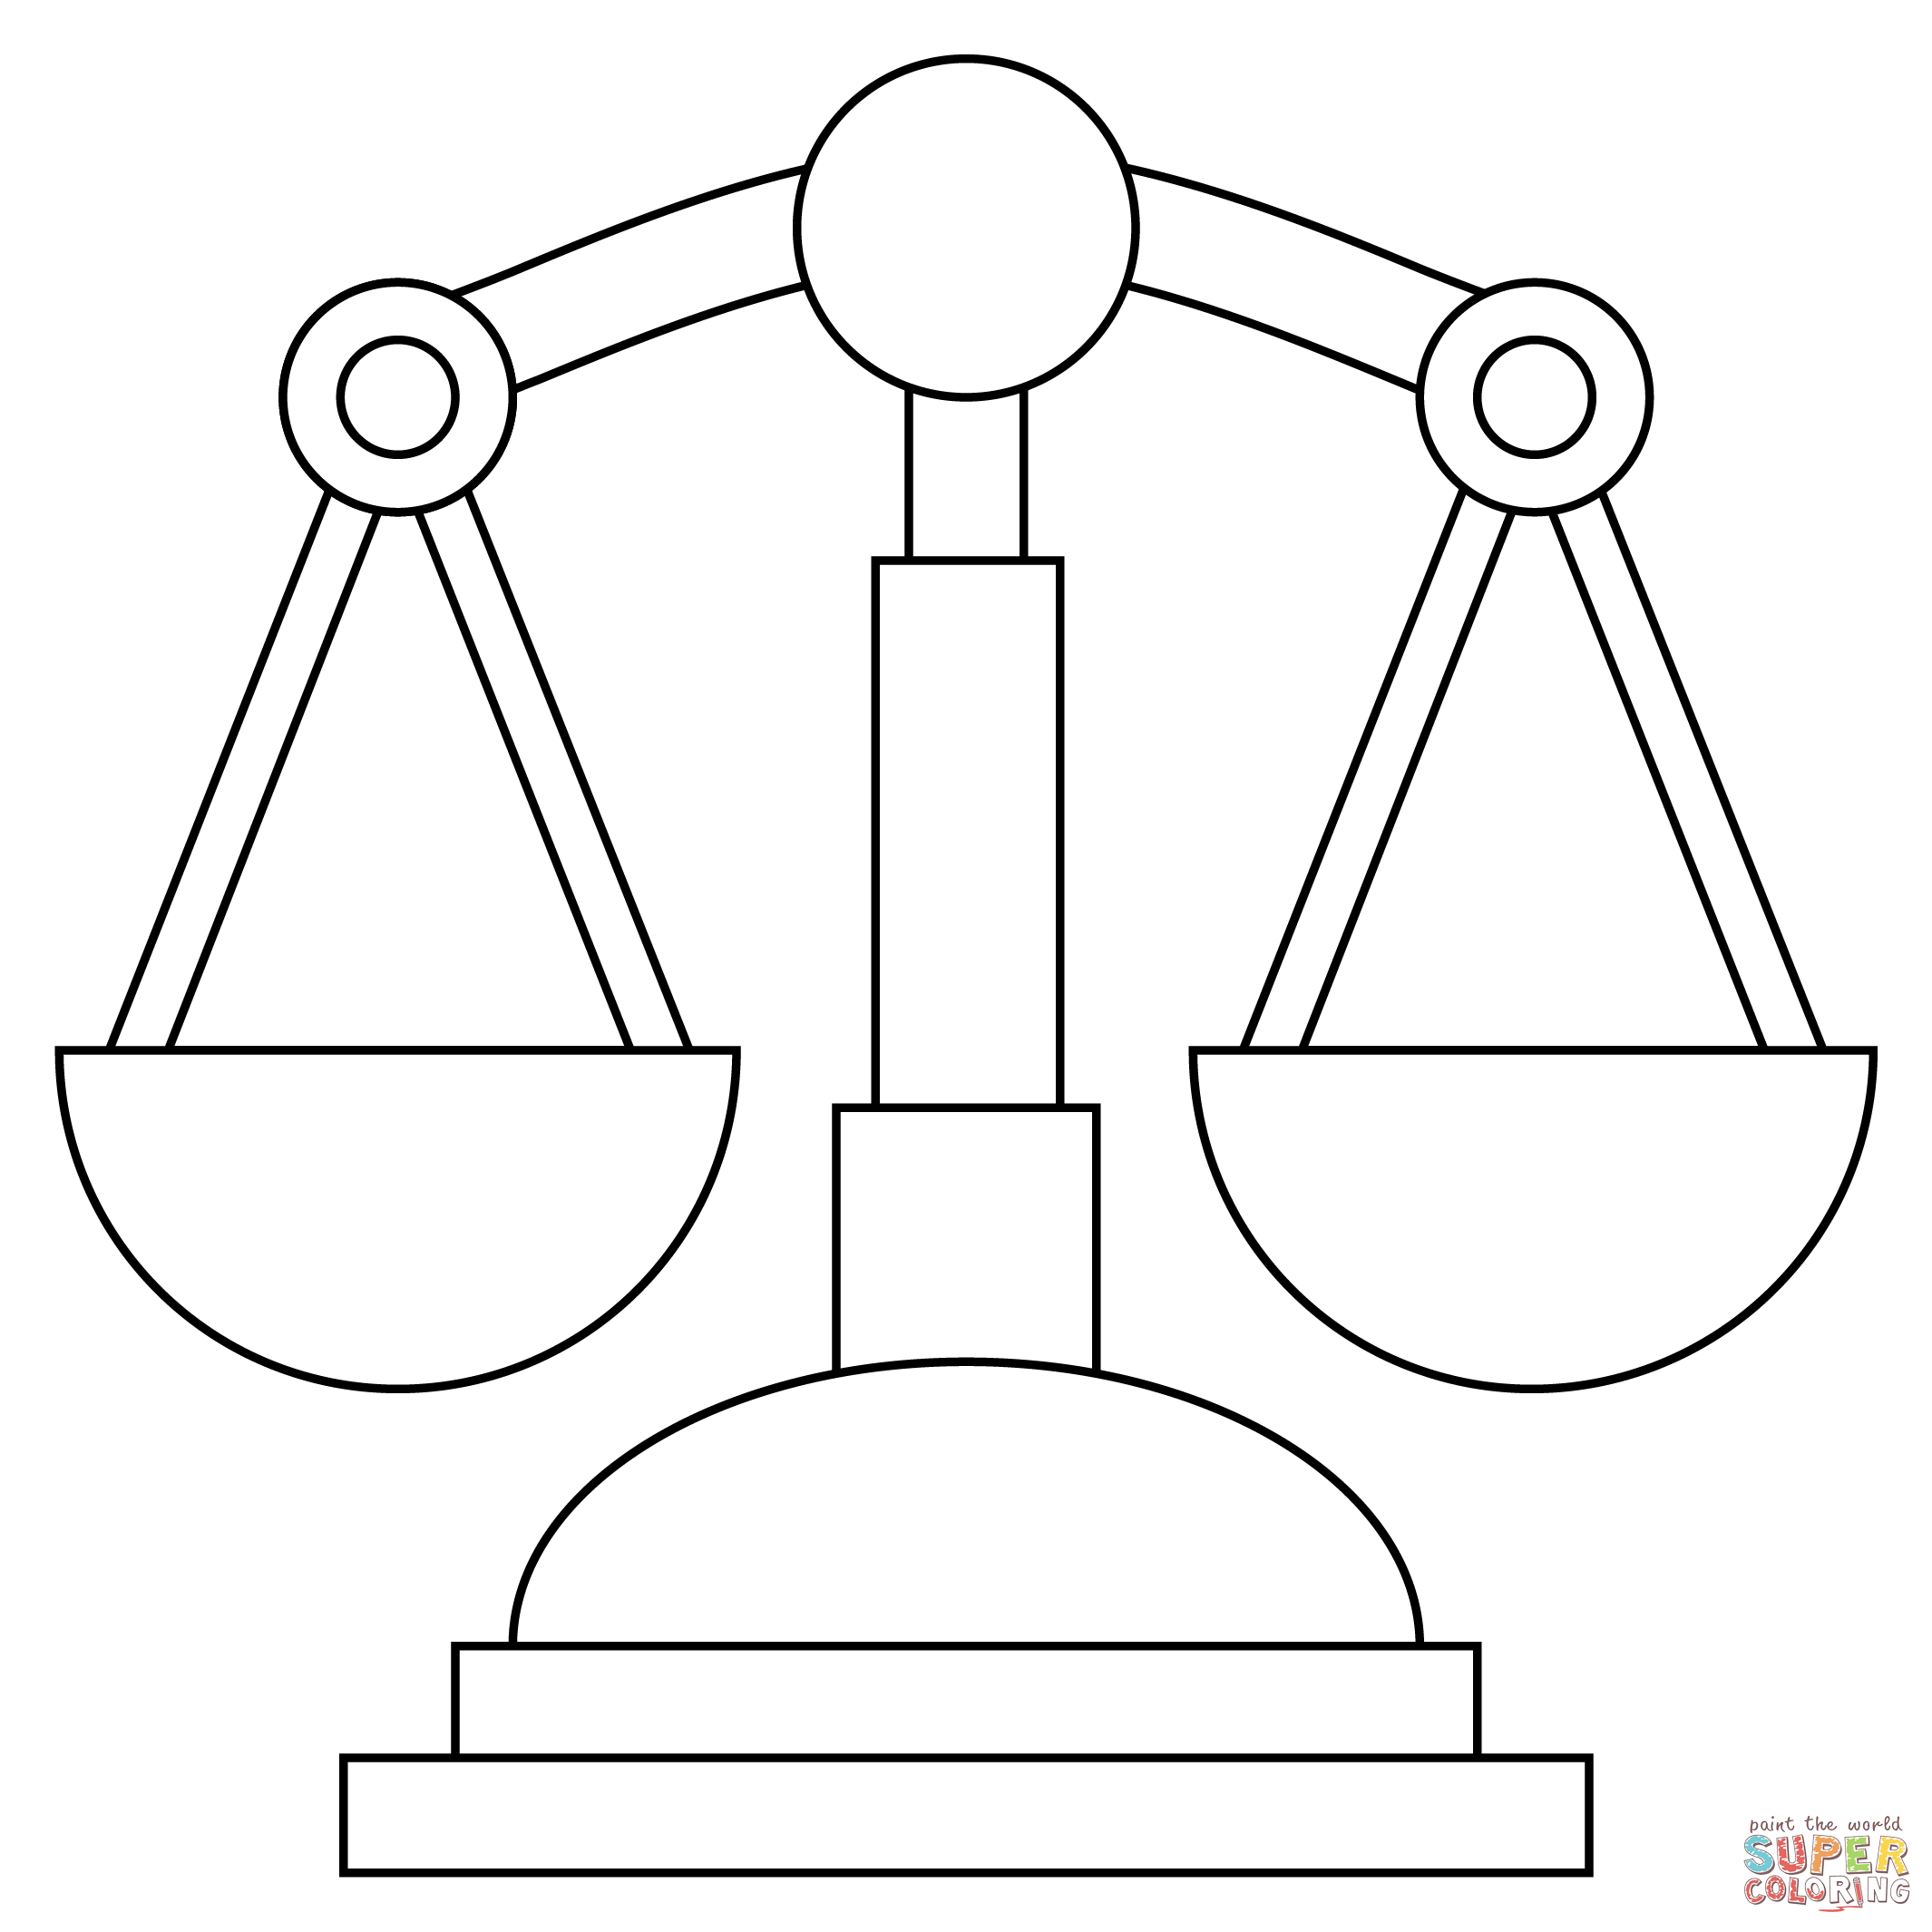 Balance Scale coloring page | Free Printable Coloring Pages